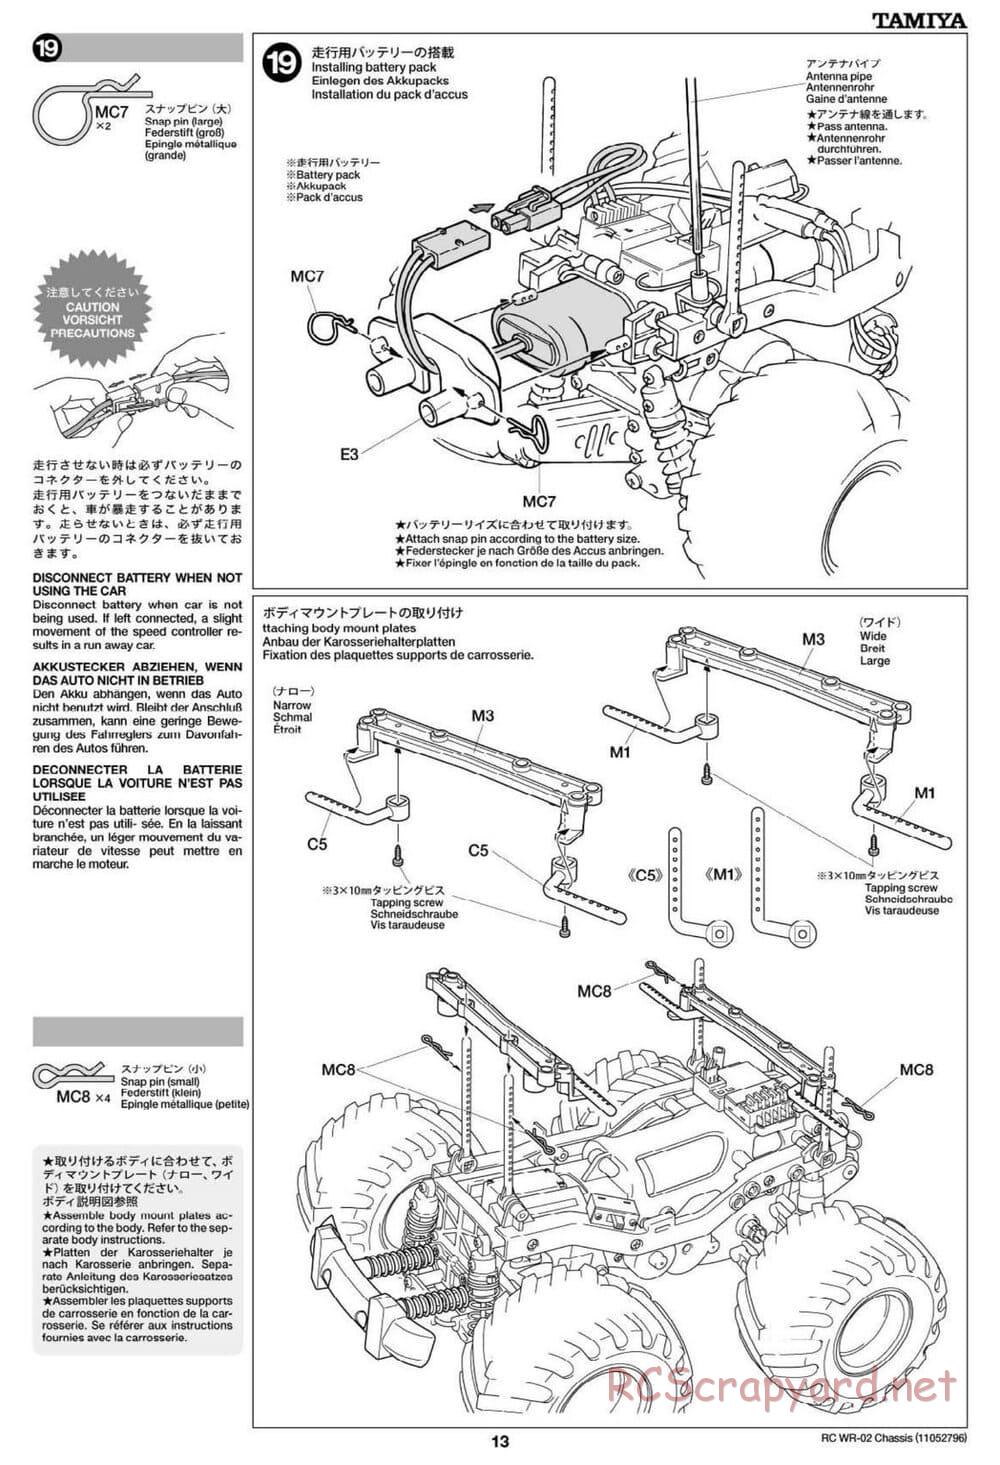 Tamiya - VW Type 2 Wheelie (T1) - WR-02 Chassis - Manual - Page 13